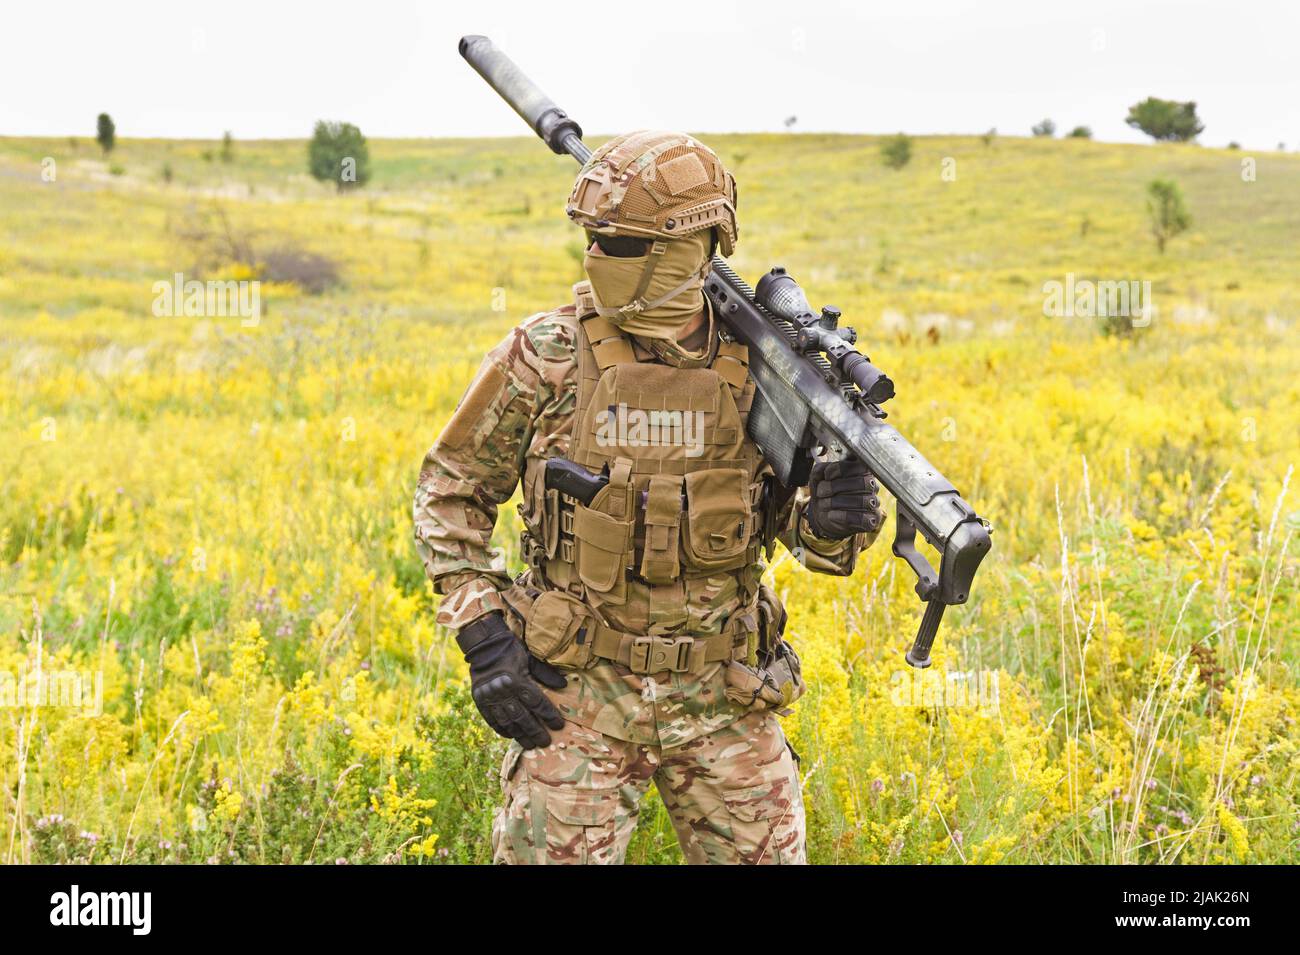 Soldier in a special military uniform, carrying a sniper rifle in a field. Stock Photo